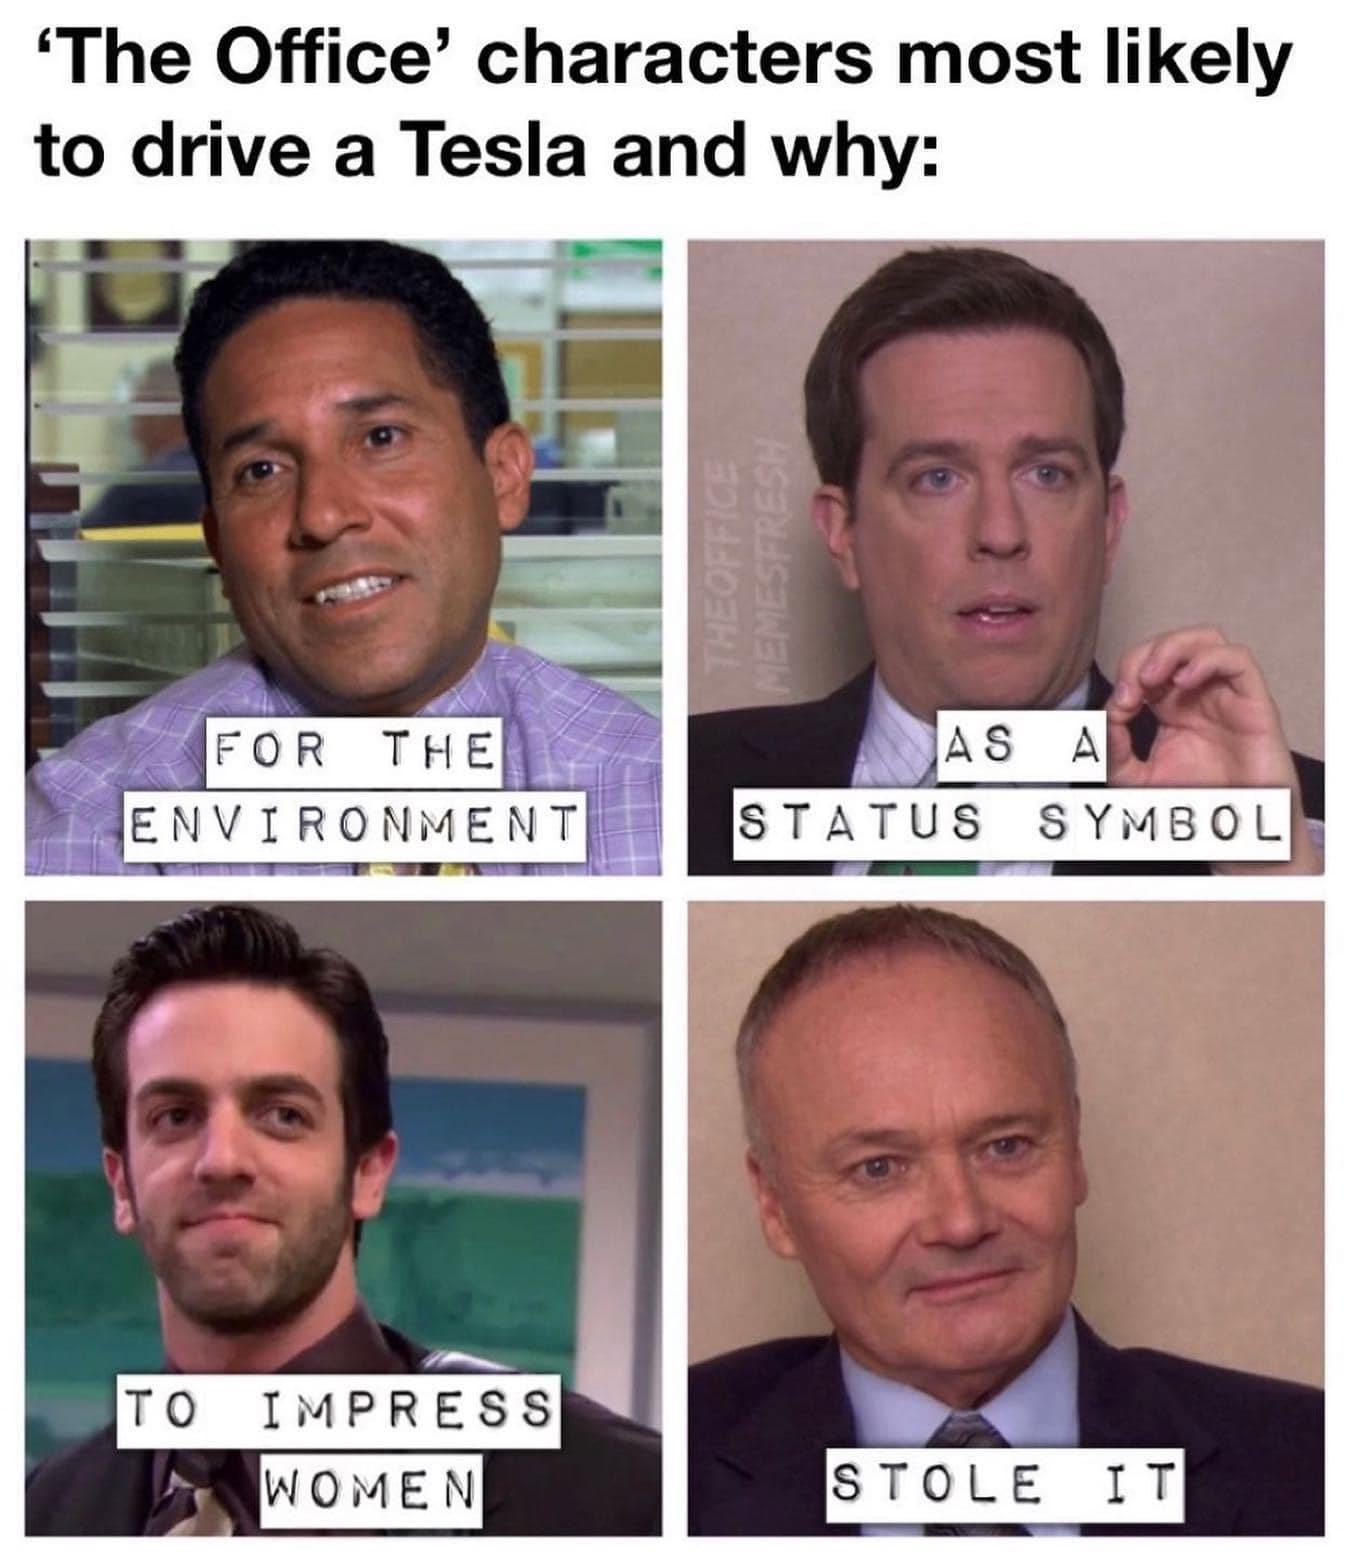 The office characters most likely to drive a tesla and why